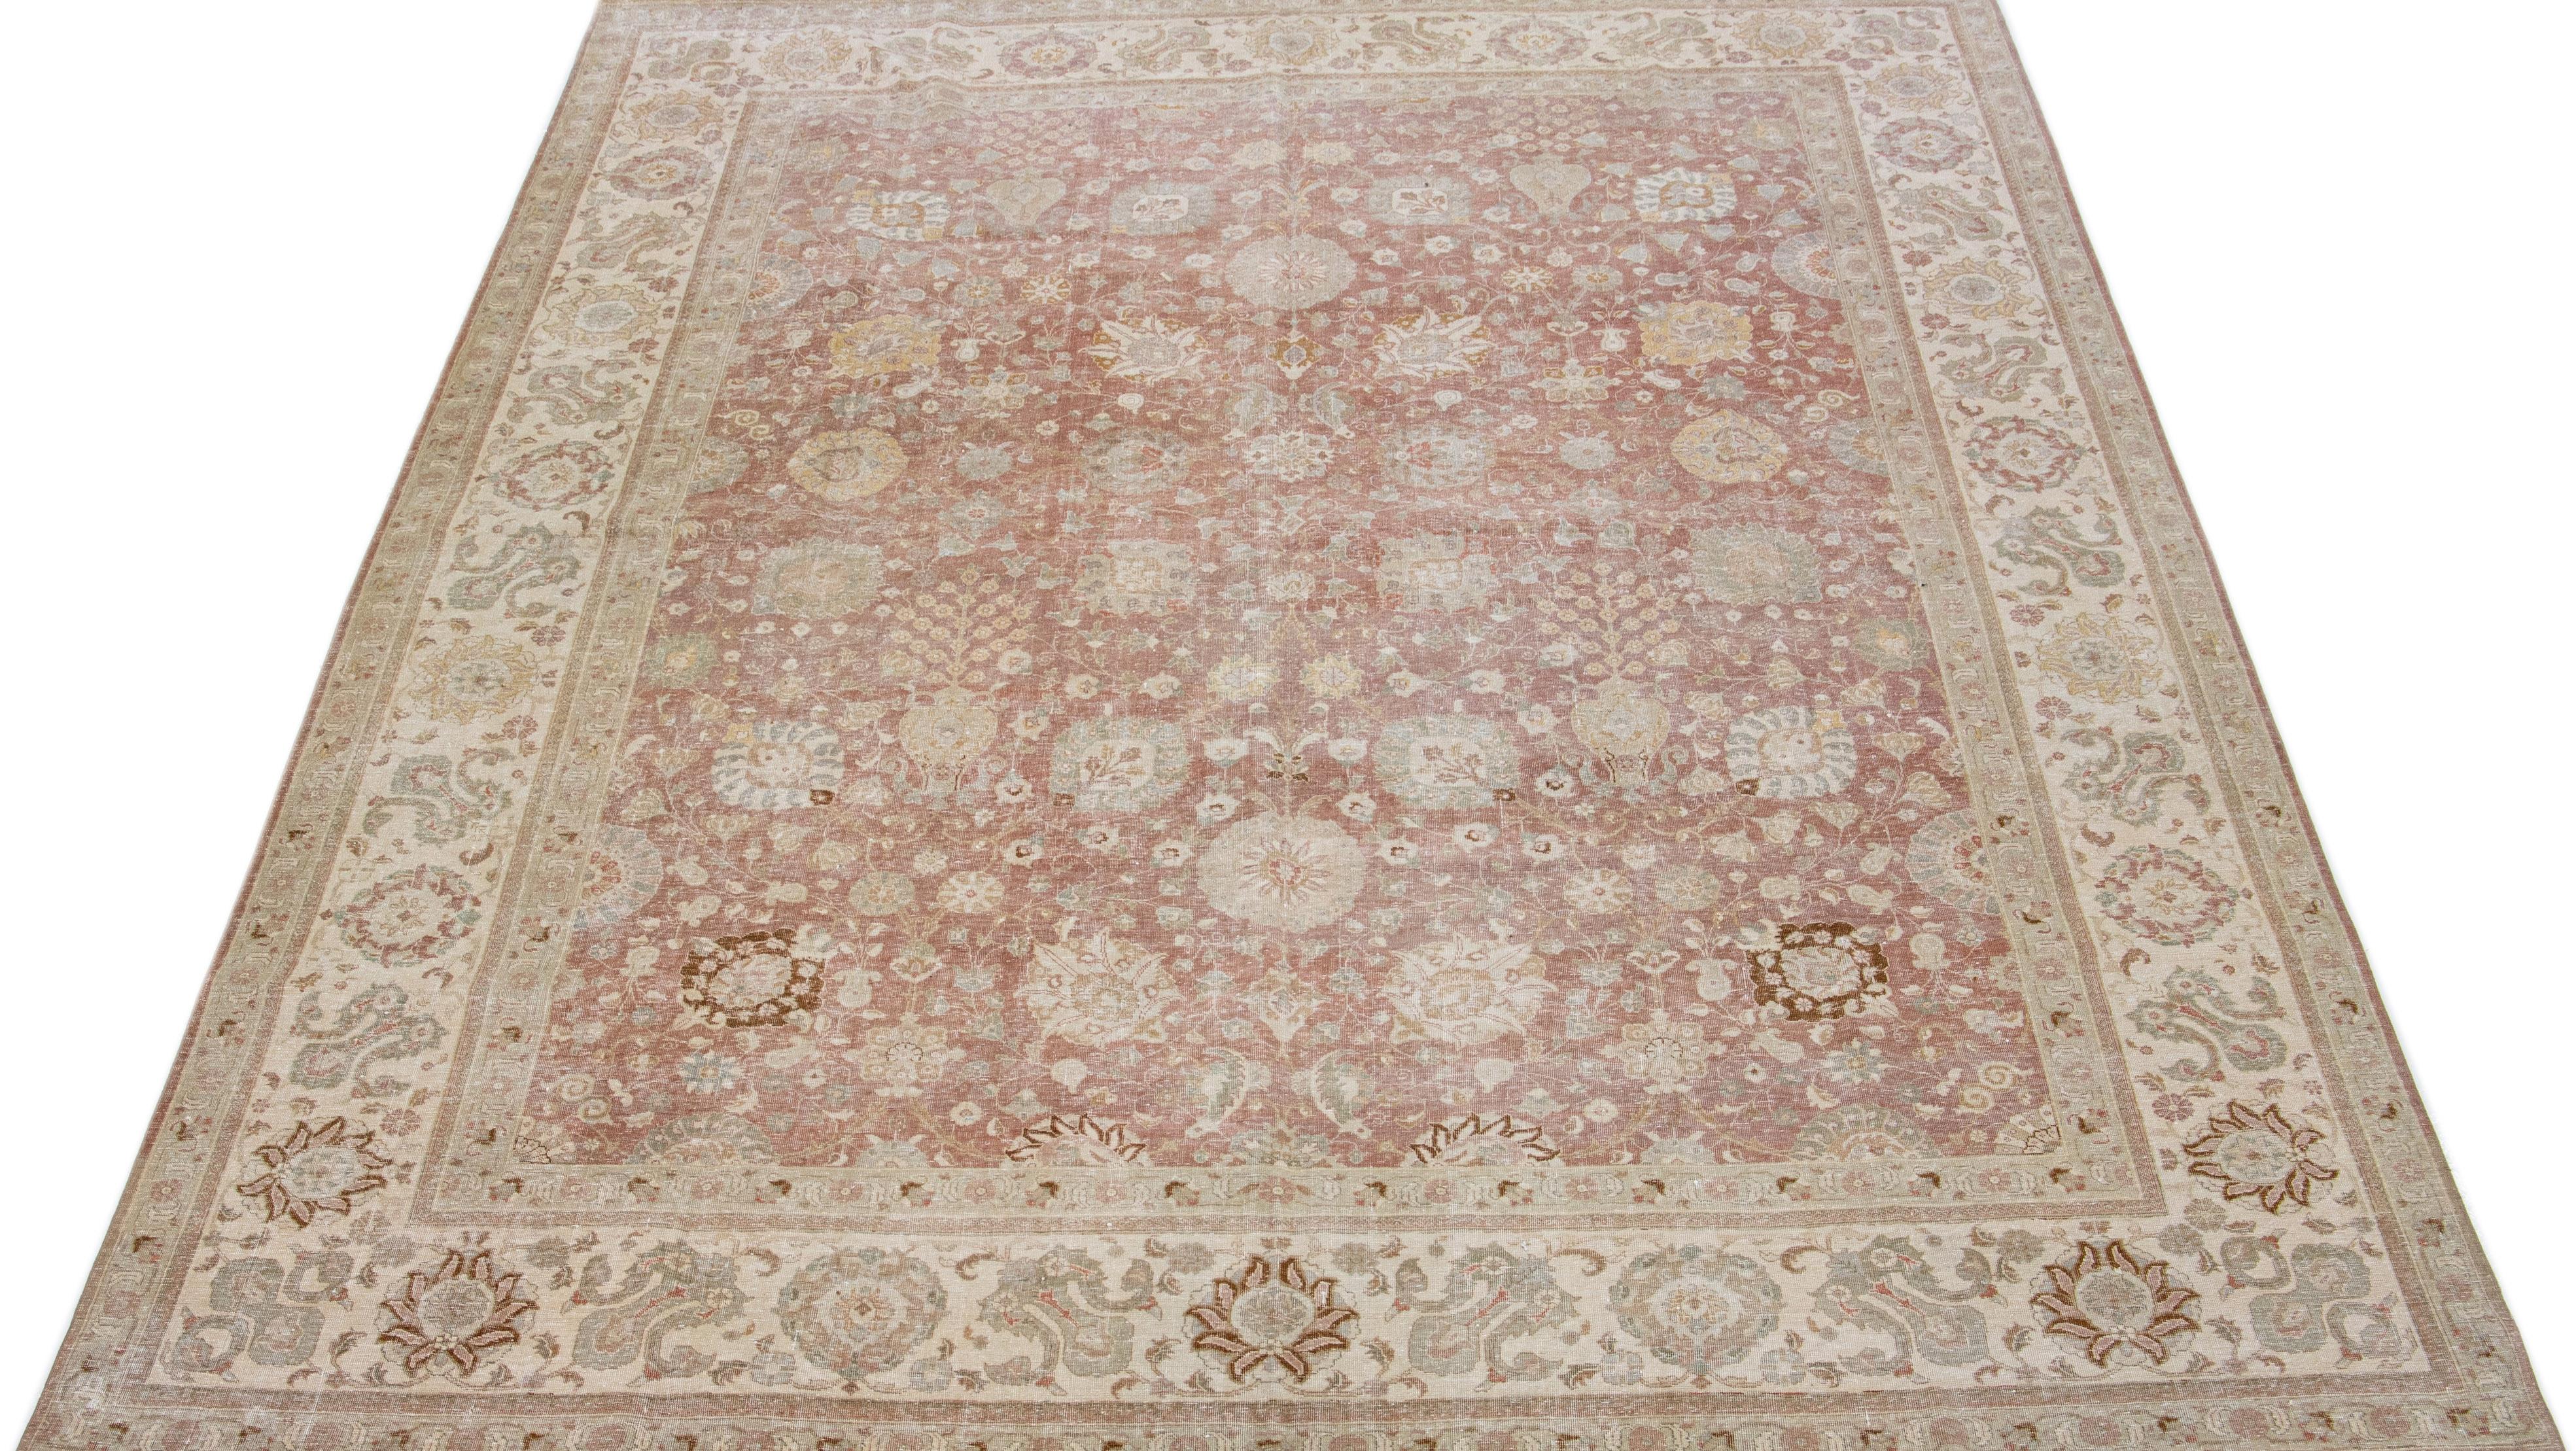 Beautiful antique Tabriz hand-knotted wool rug with a rust color field. This Persian rug has gray, green, and goldenrod accents in a gorgeous all-over floral design.

This rug measures: 9'9